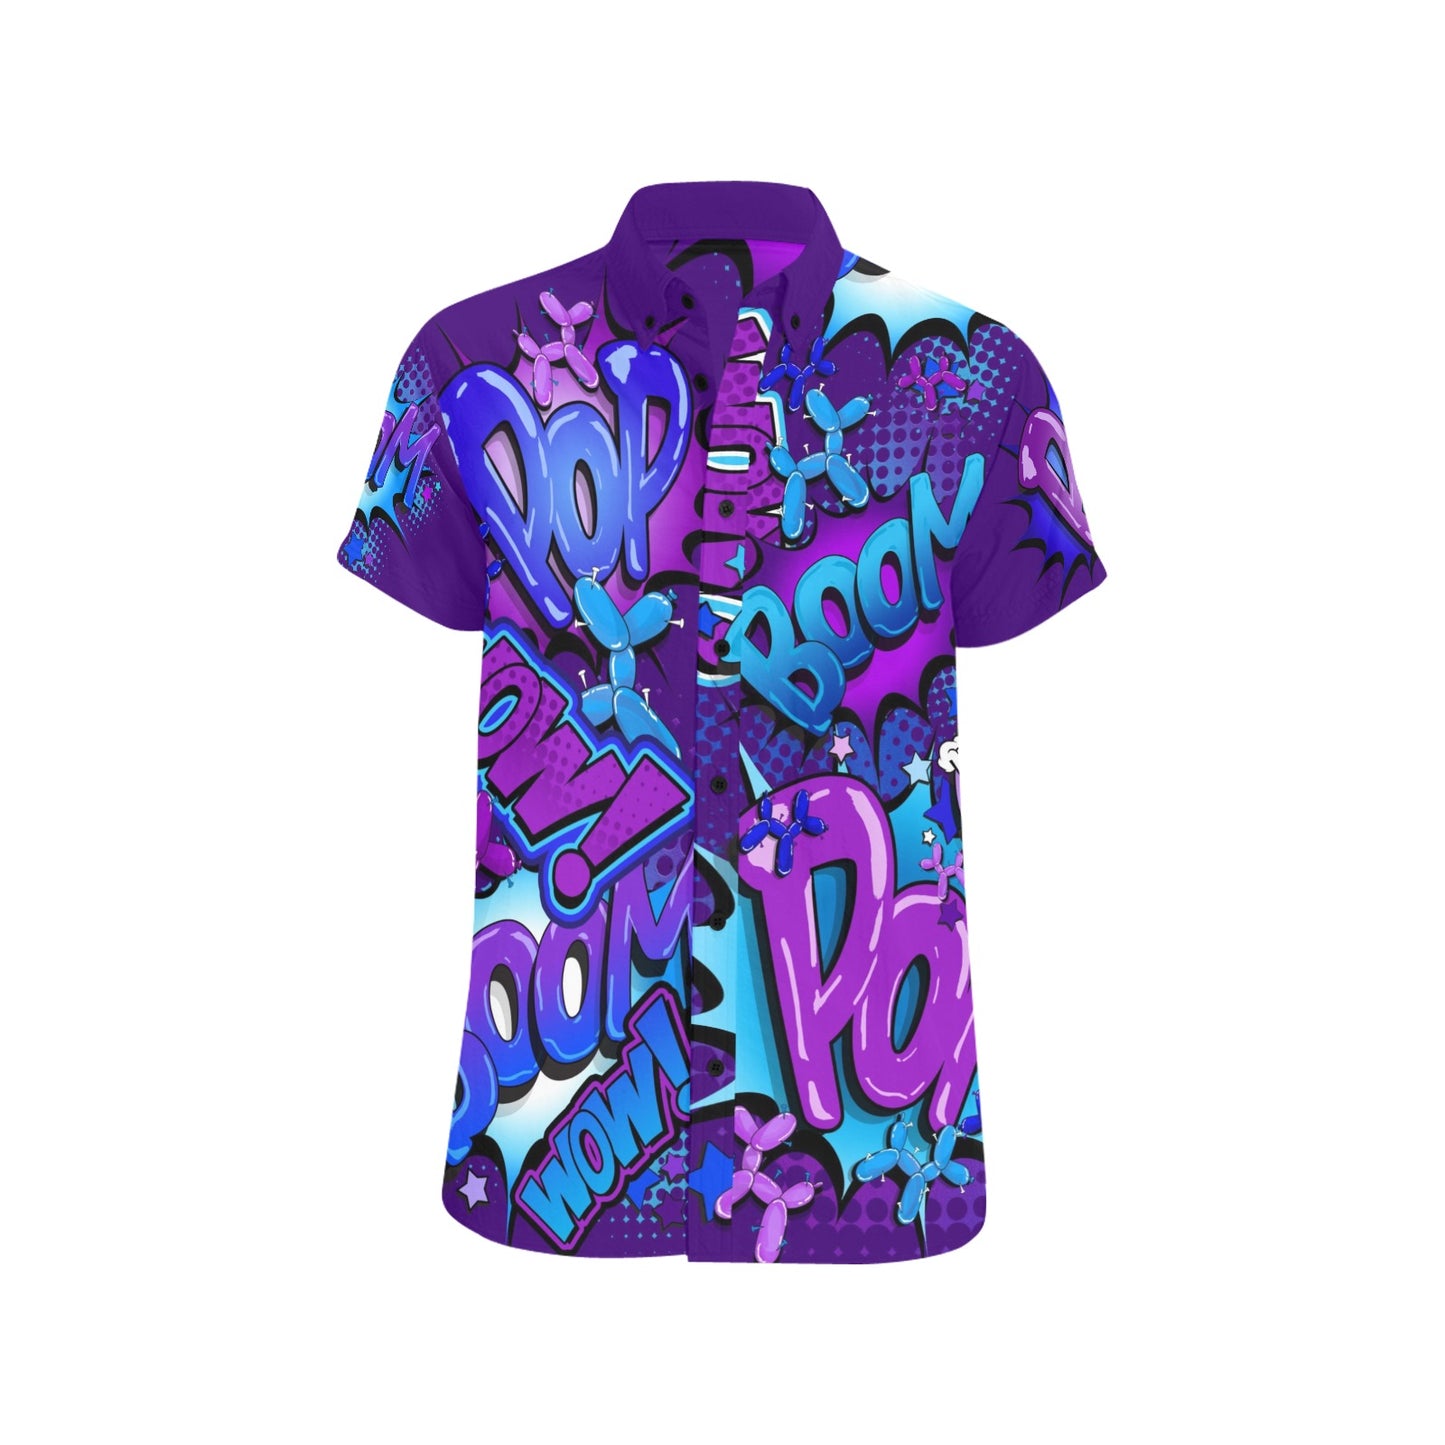 Balloon Twisting Clothing shirt in purple and blue